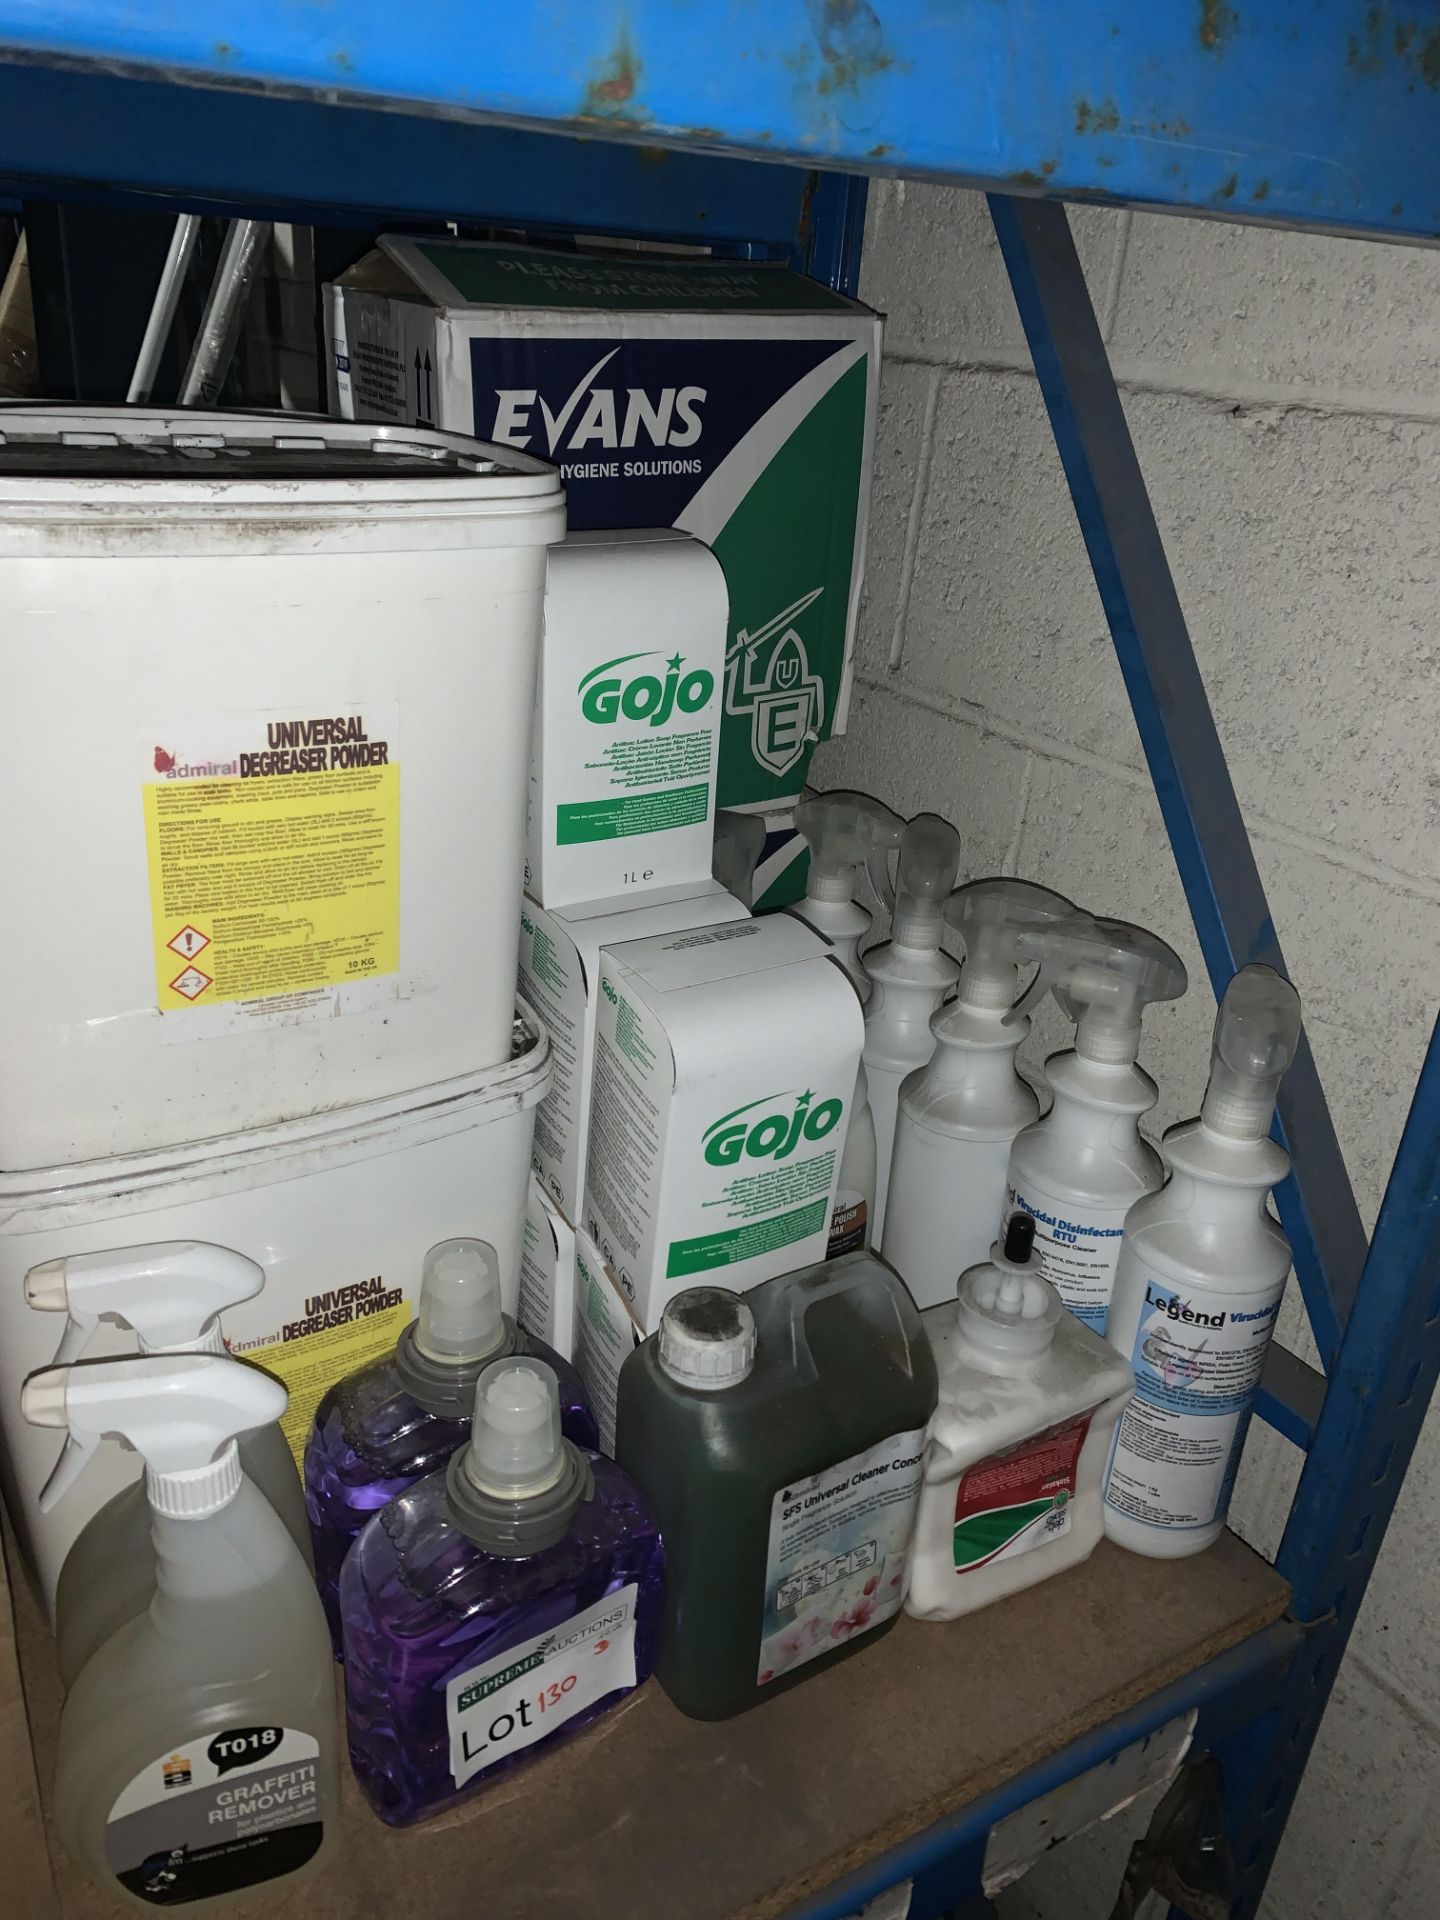 MIXED CLEANING LOT INCLUDING GOJO, DEGREASER, GRAFFITTI REMOVER ETC S1-23